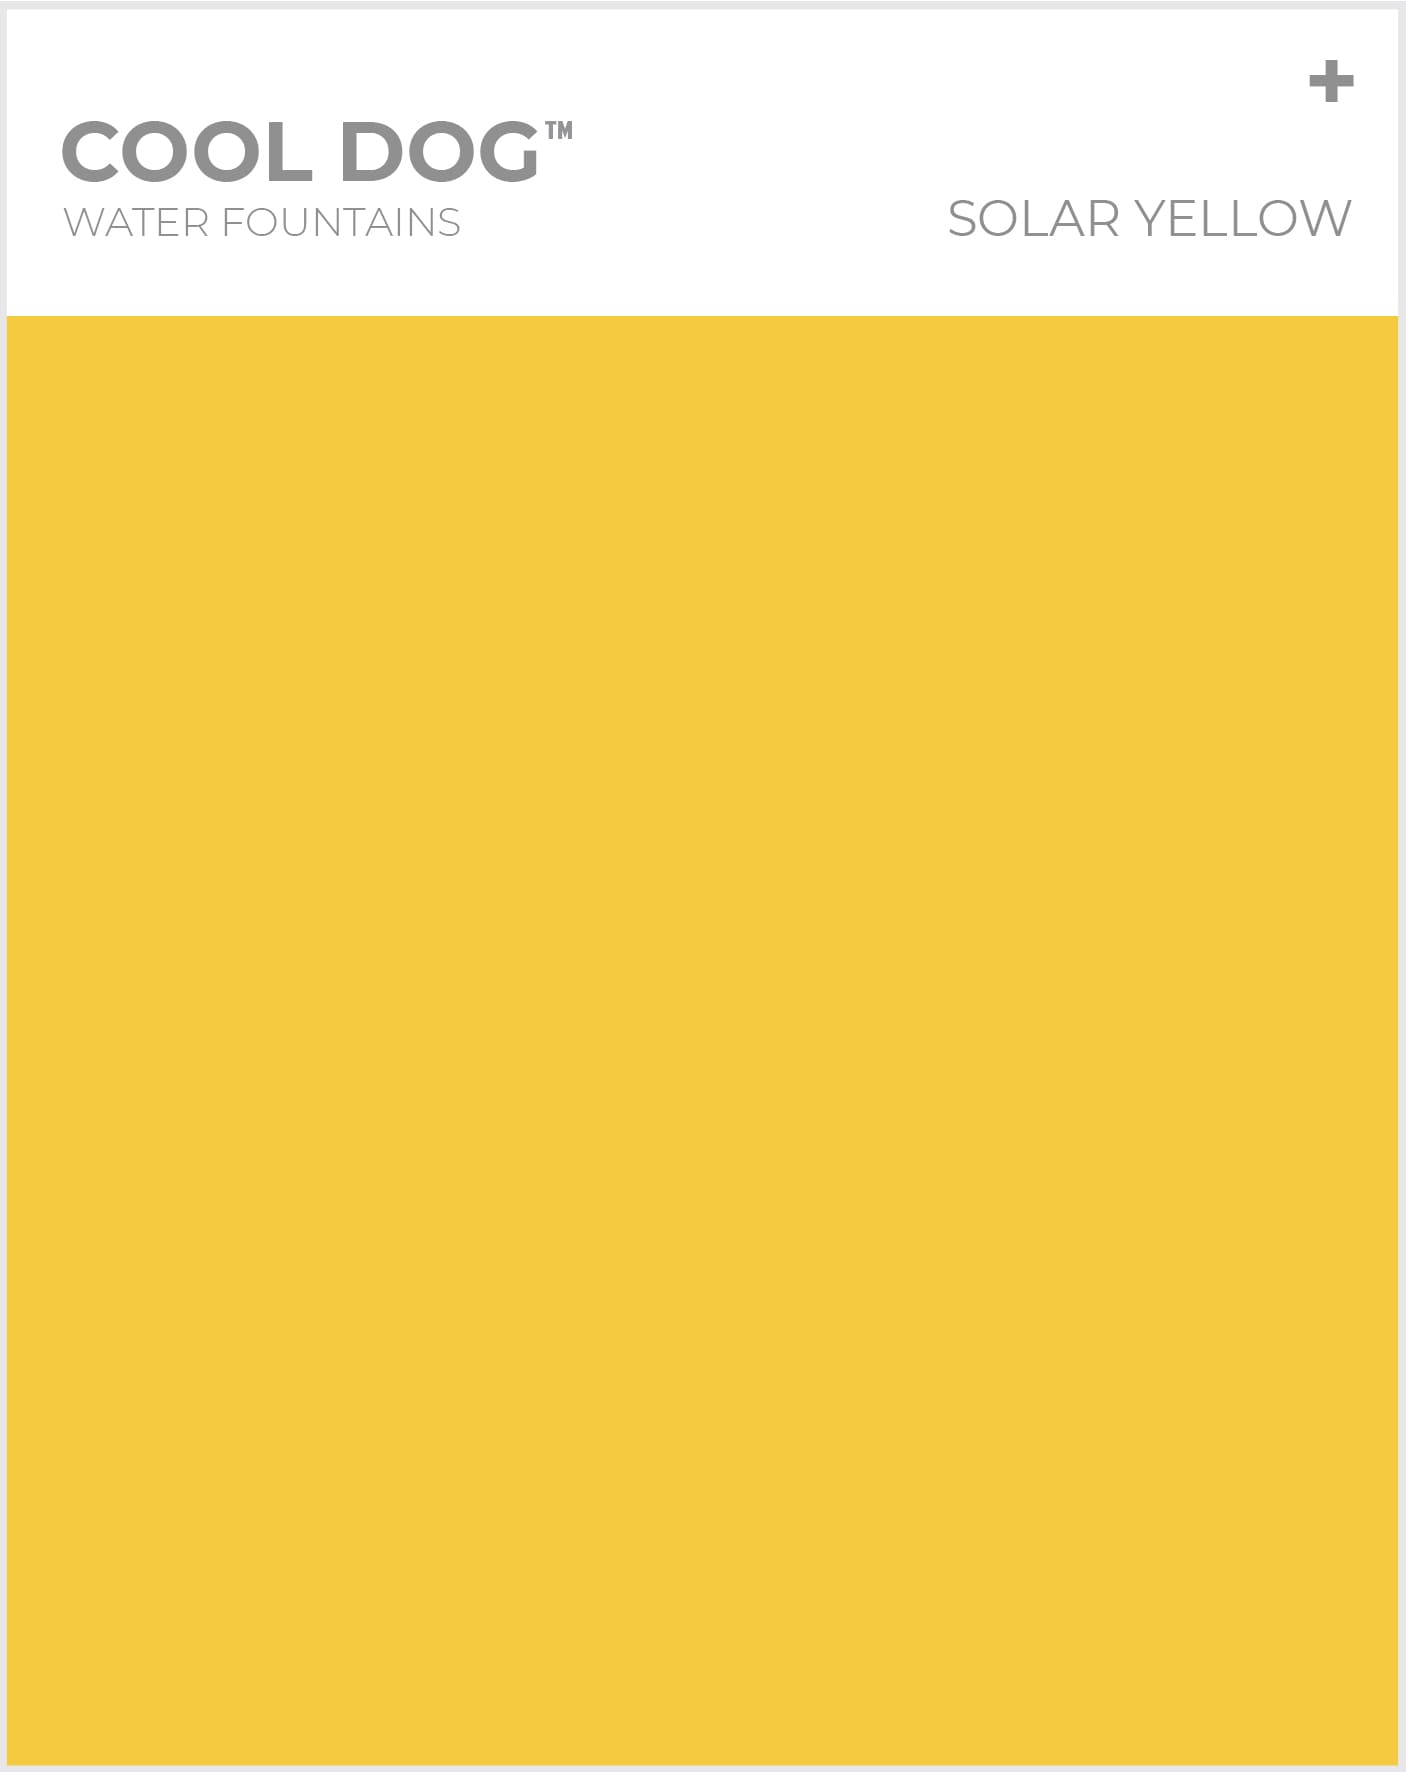 cool-dog-water-fountains-solar-yellow